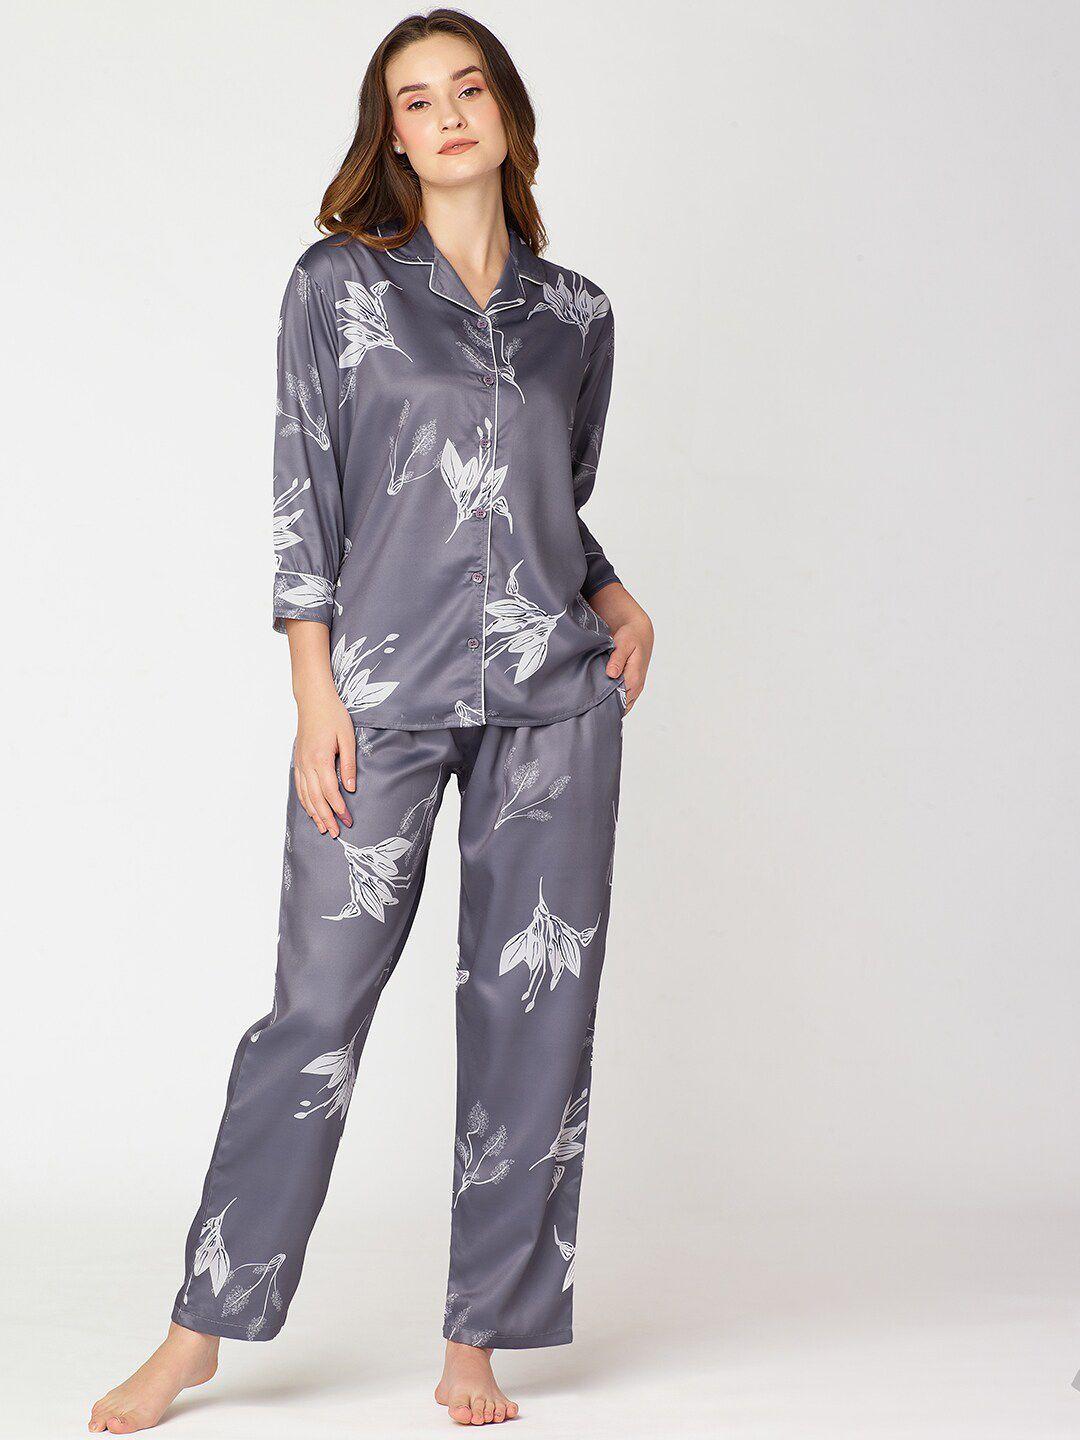 i-like-me-grey-&-white-floral-printed-satin-night-suit